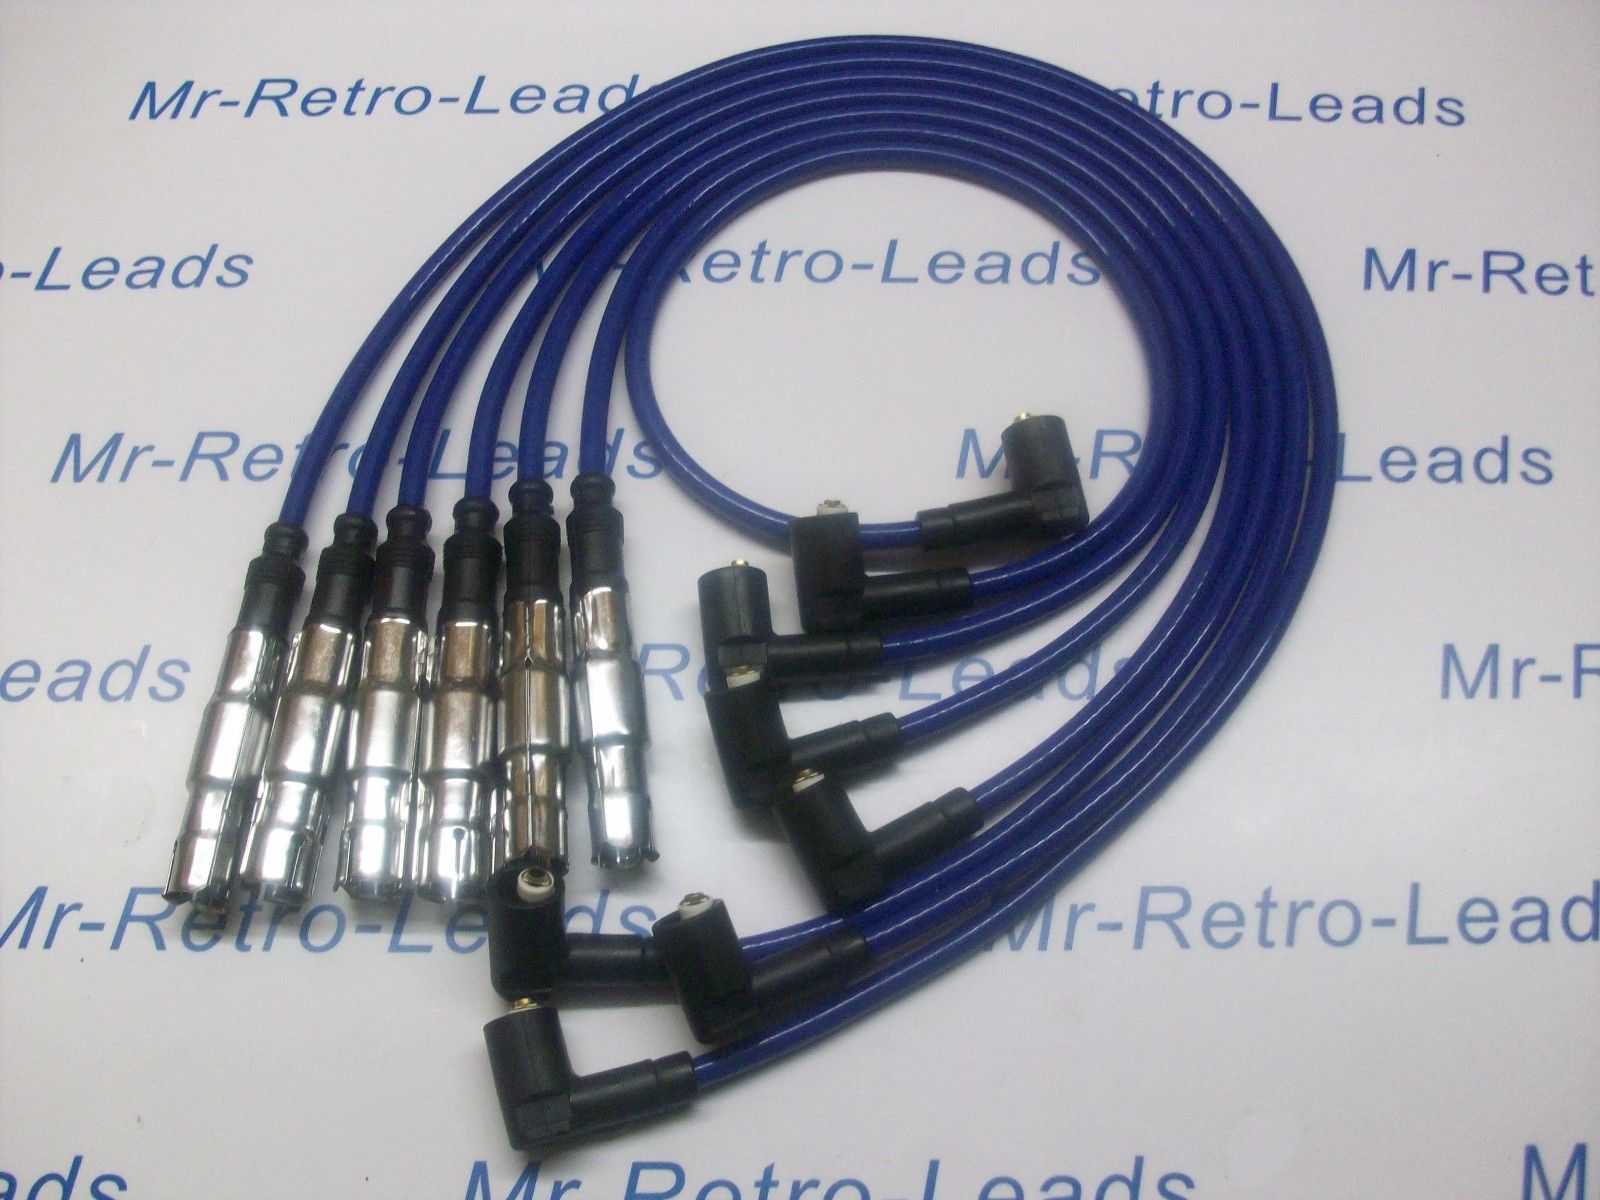 RED 8.5MM PERFORMANCE IGNITION LEADS VR6 OBD1 CORRADO VR6 PASSAT QUALITY LEADS